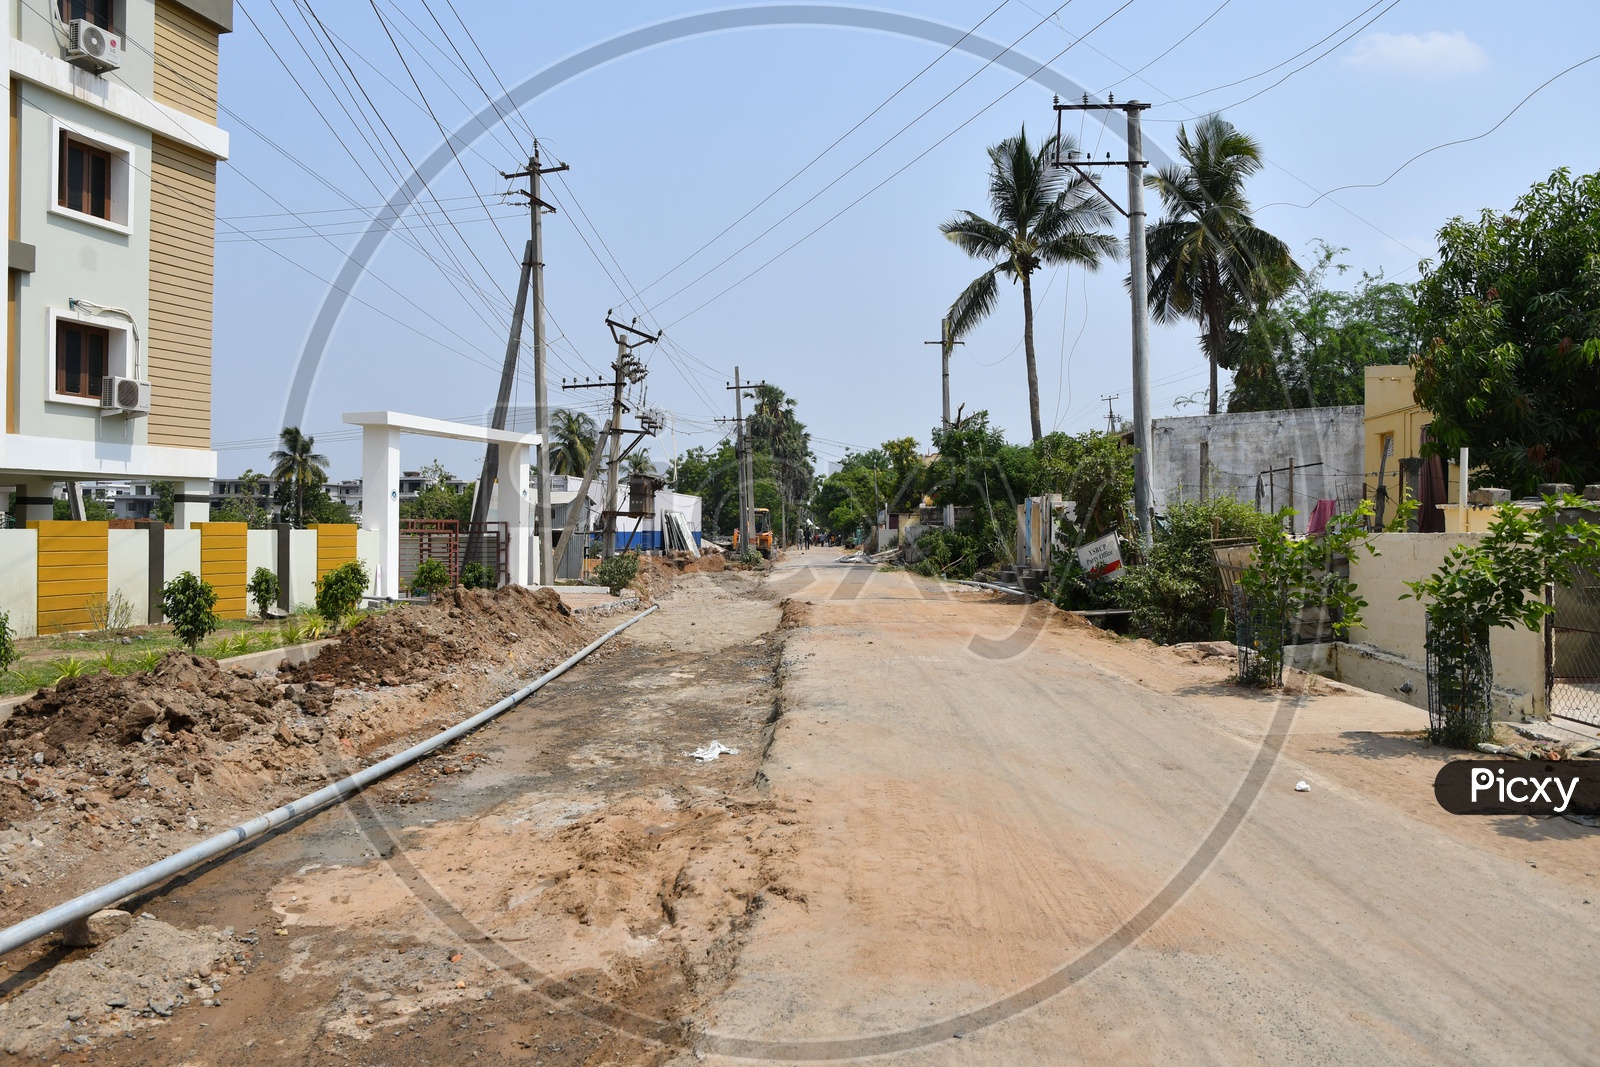 Road Extension Work in Progress at AP Chief Minister Y.S. Jaganmohan Reddy Residence